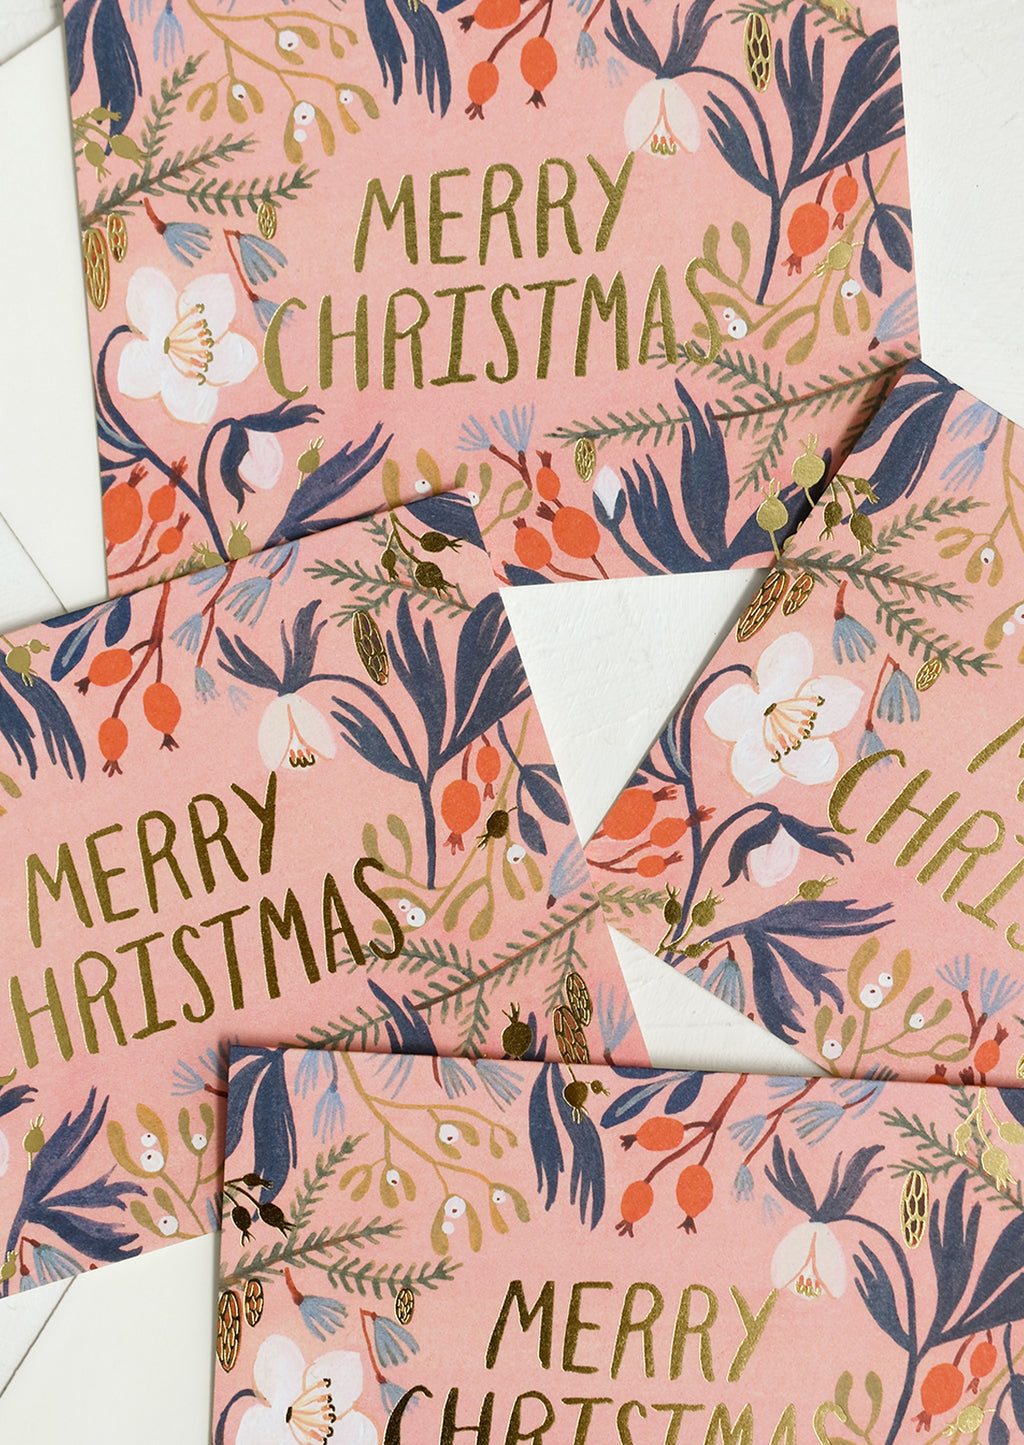 1: A set of pink floral print cards reading "Merry christmas".